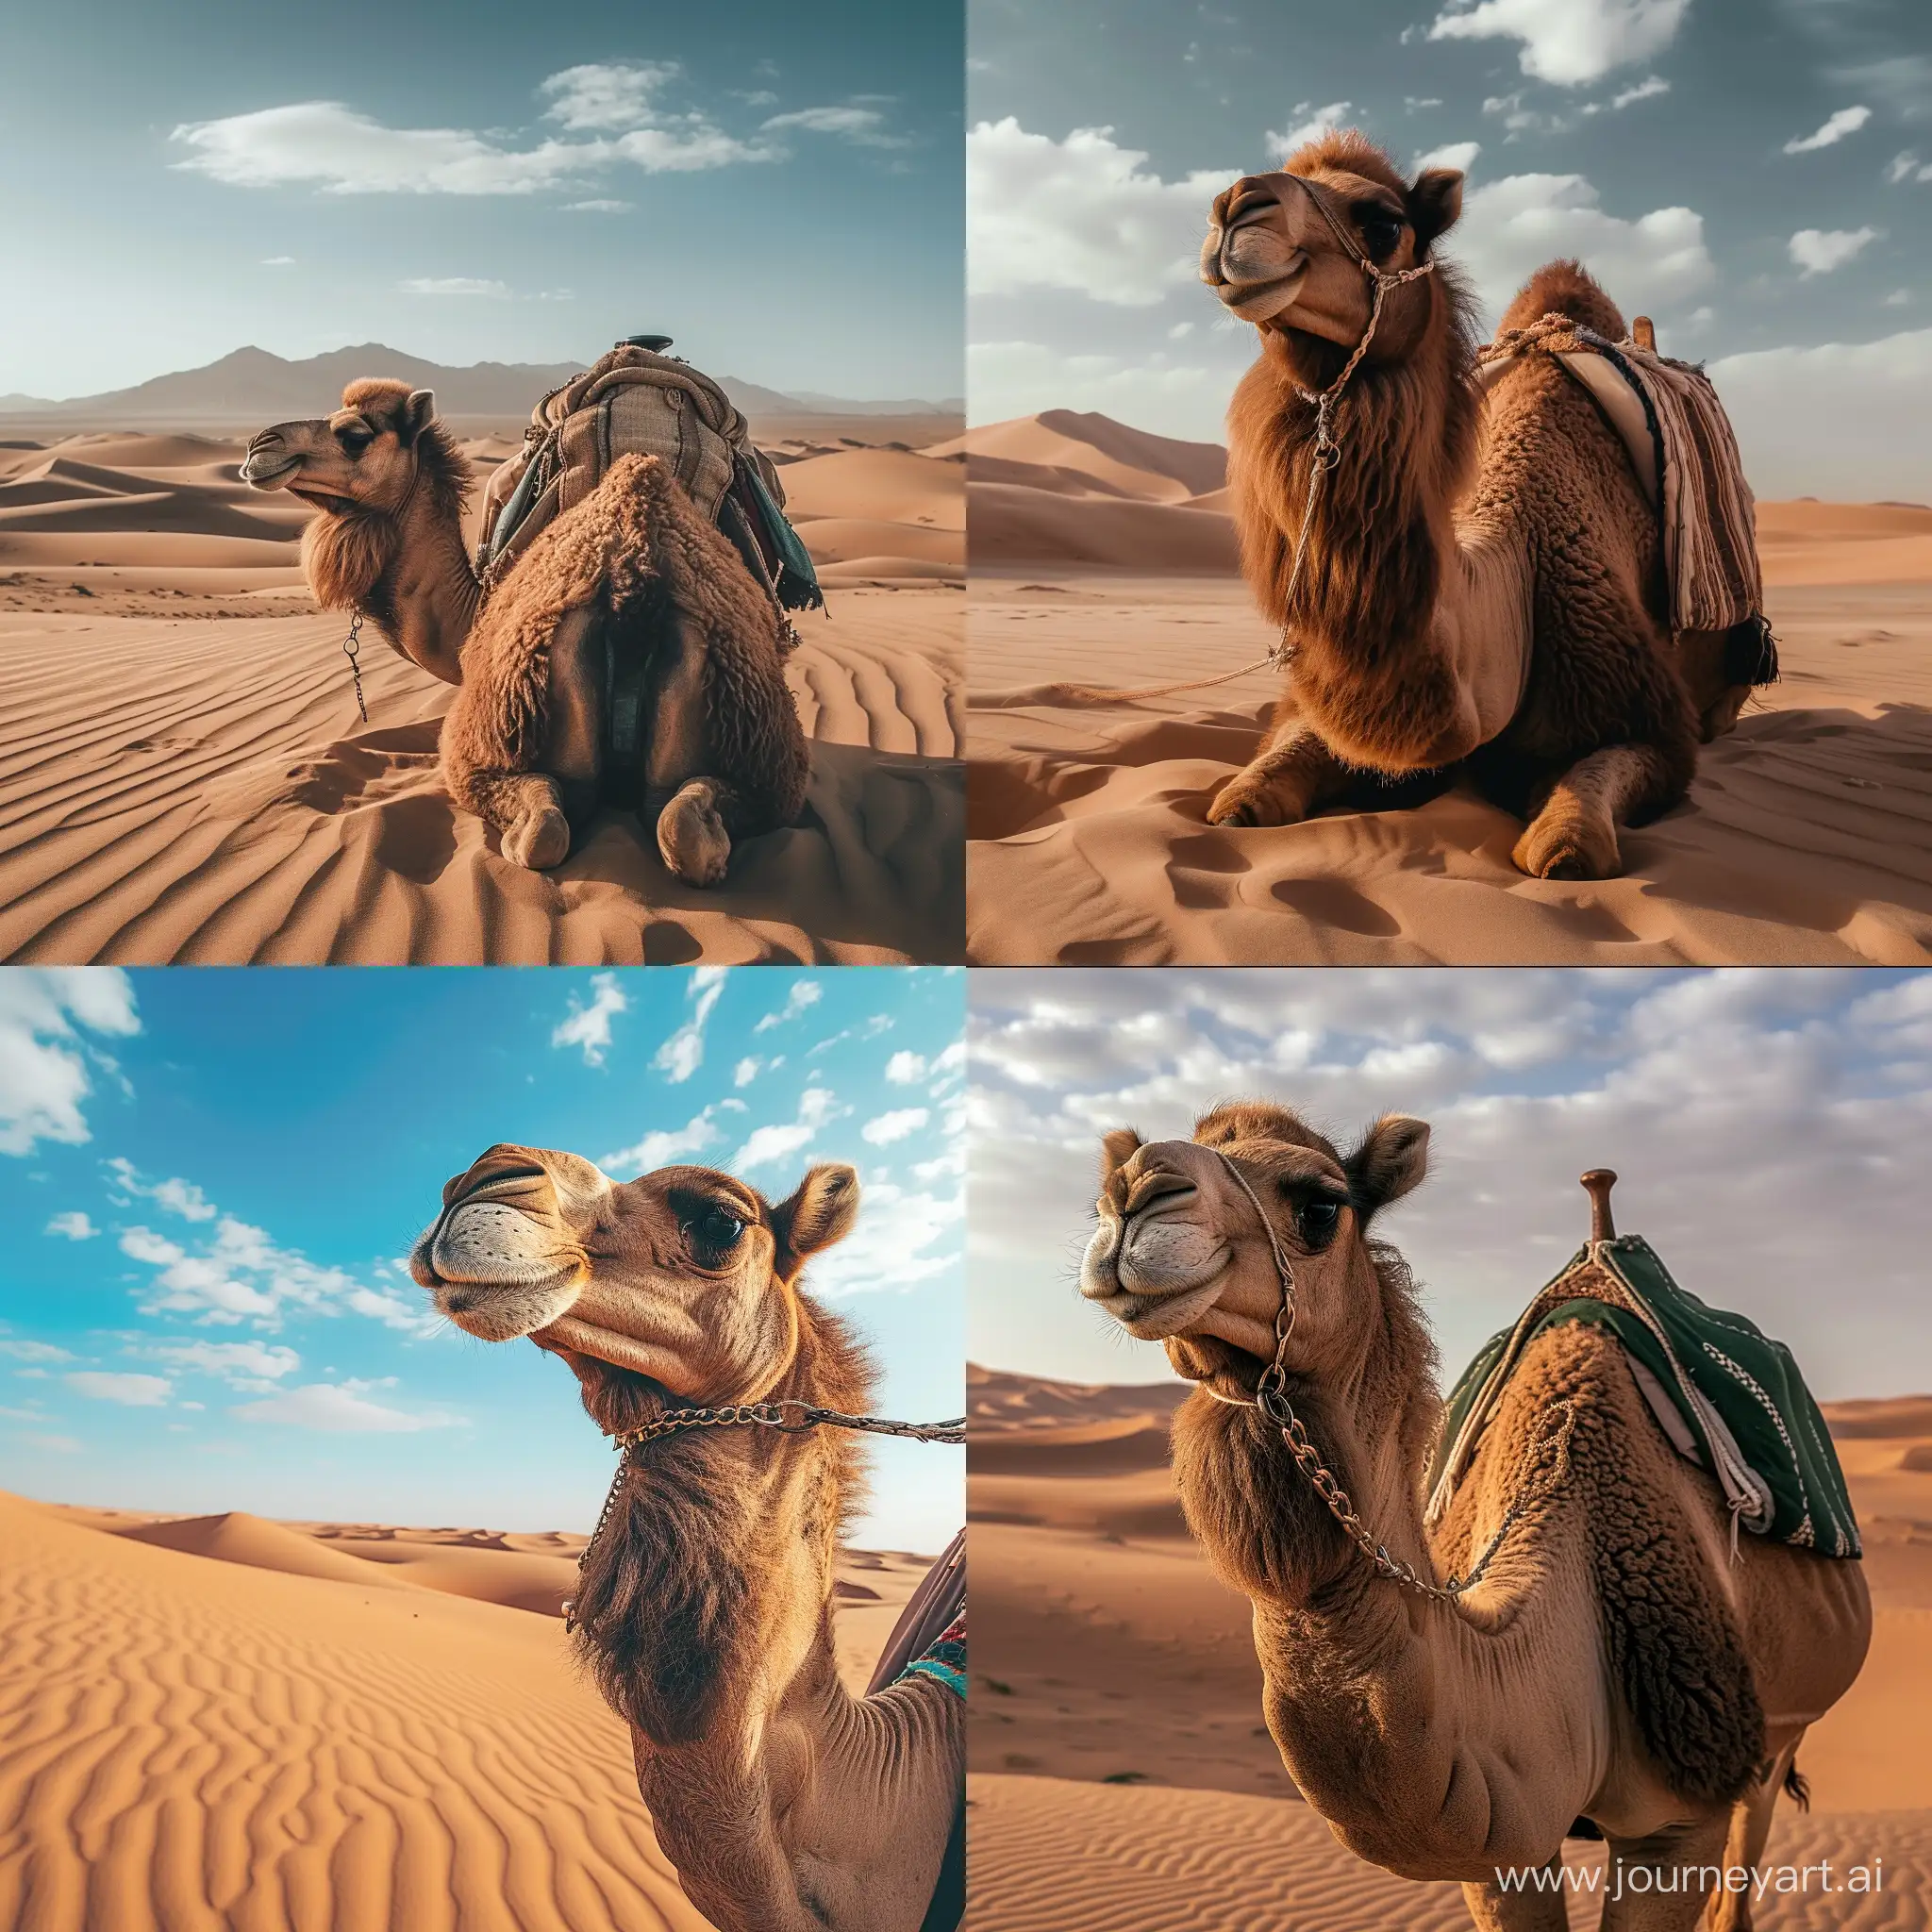 A CAMEL IN THE DESERT SAVED HIS FRIEND SHIP
